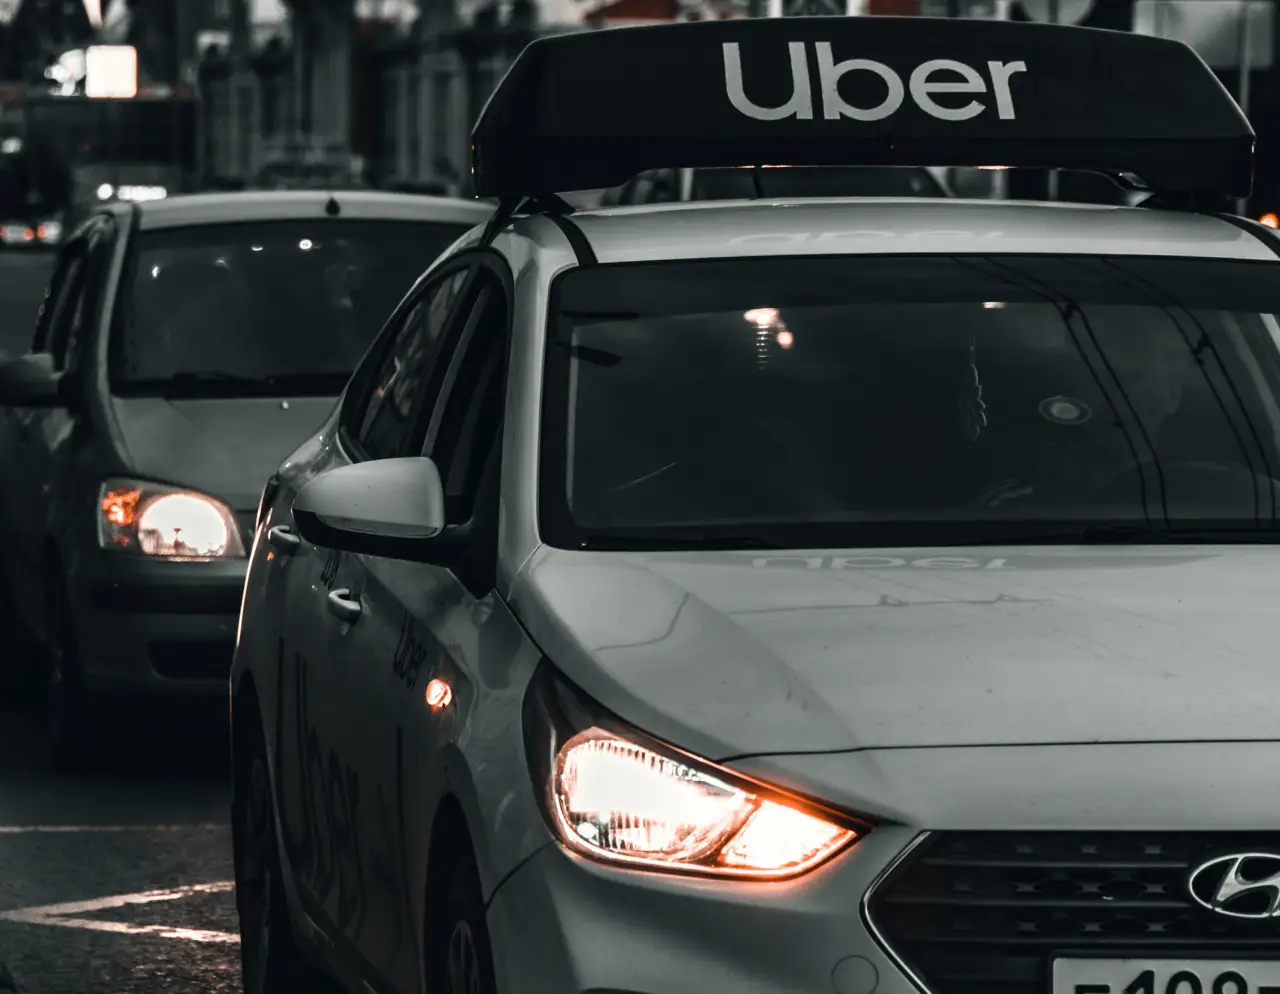 Uber offers payments to car owners in the United States to try other modes of transportation